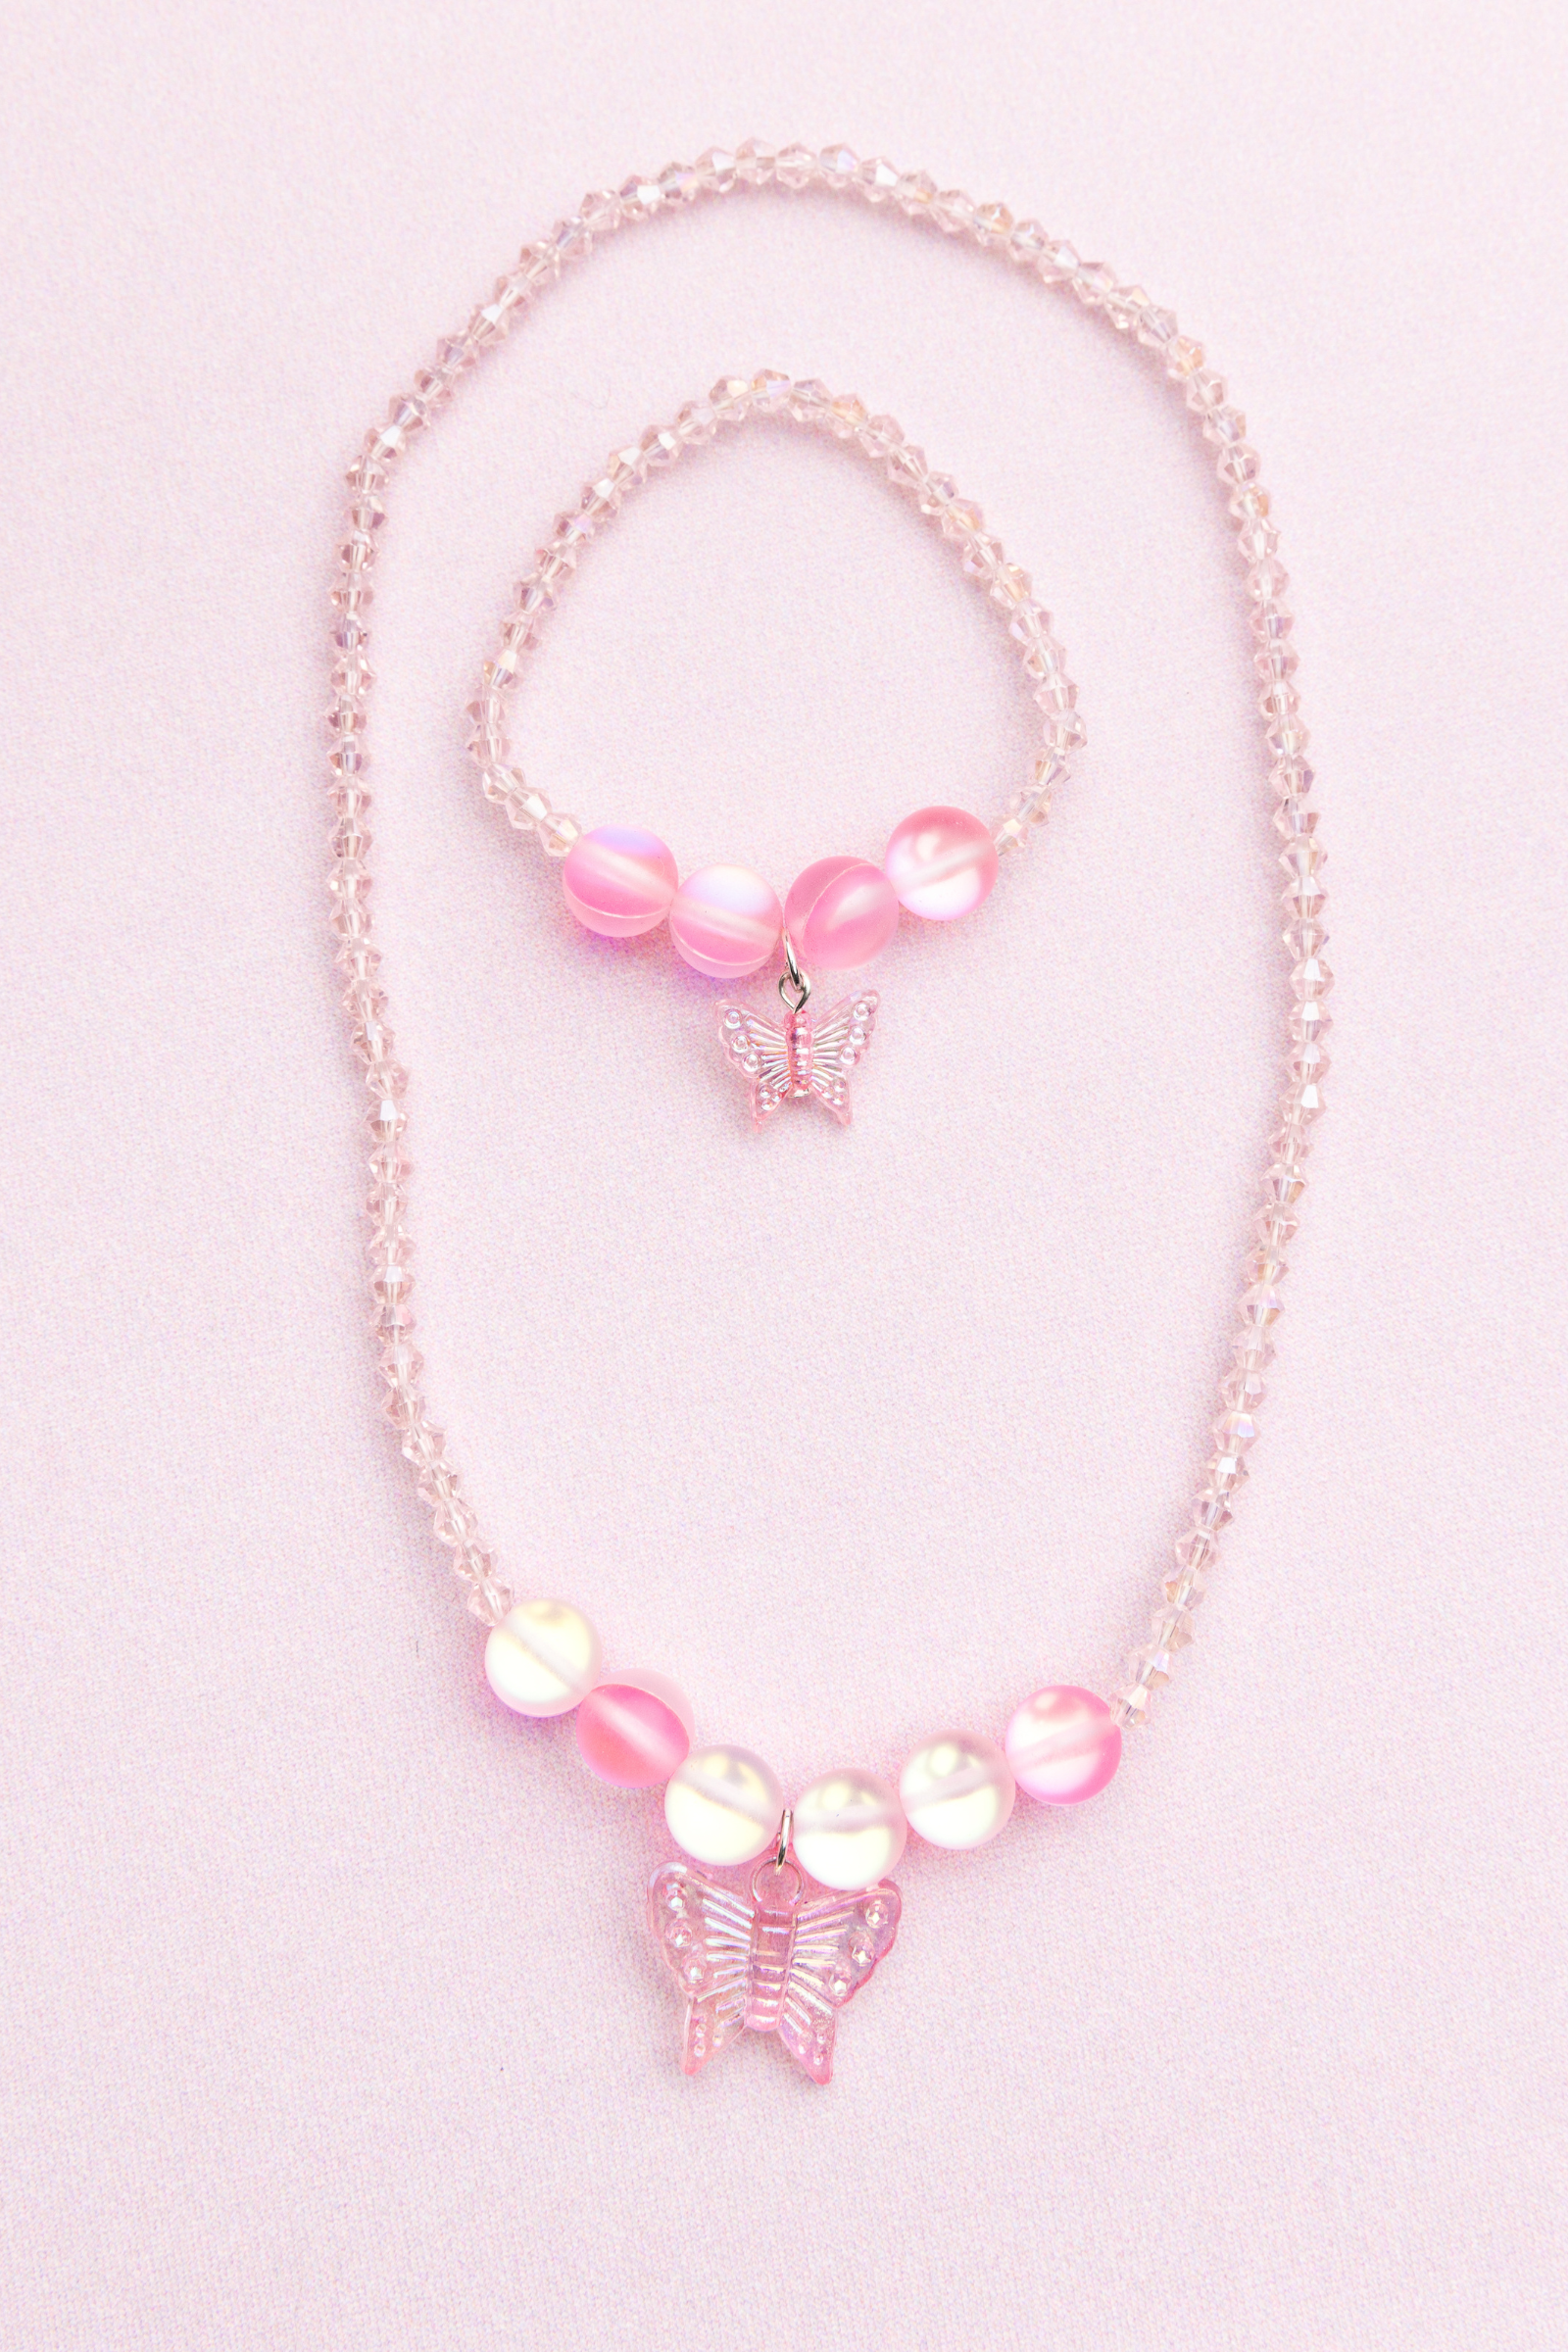 Pale Pink Pearl Necklace with magnetic clasp — Boyer New York